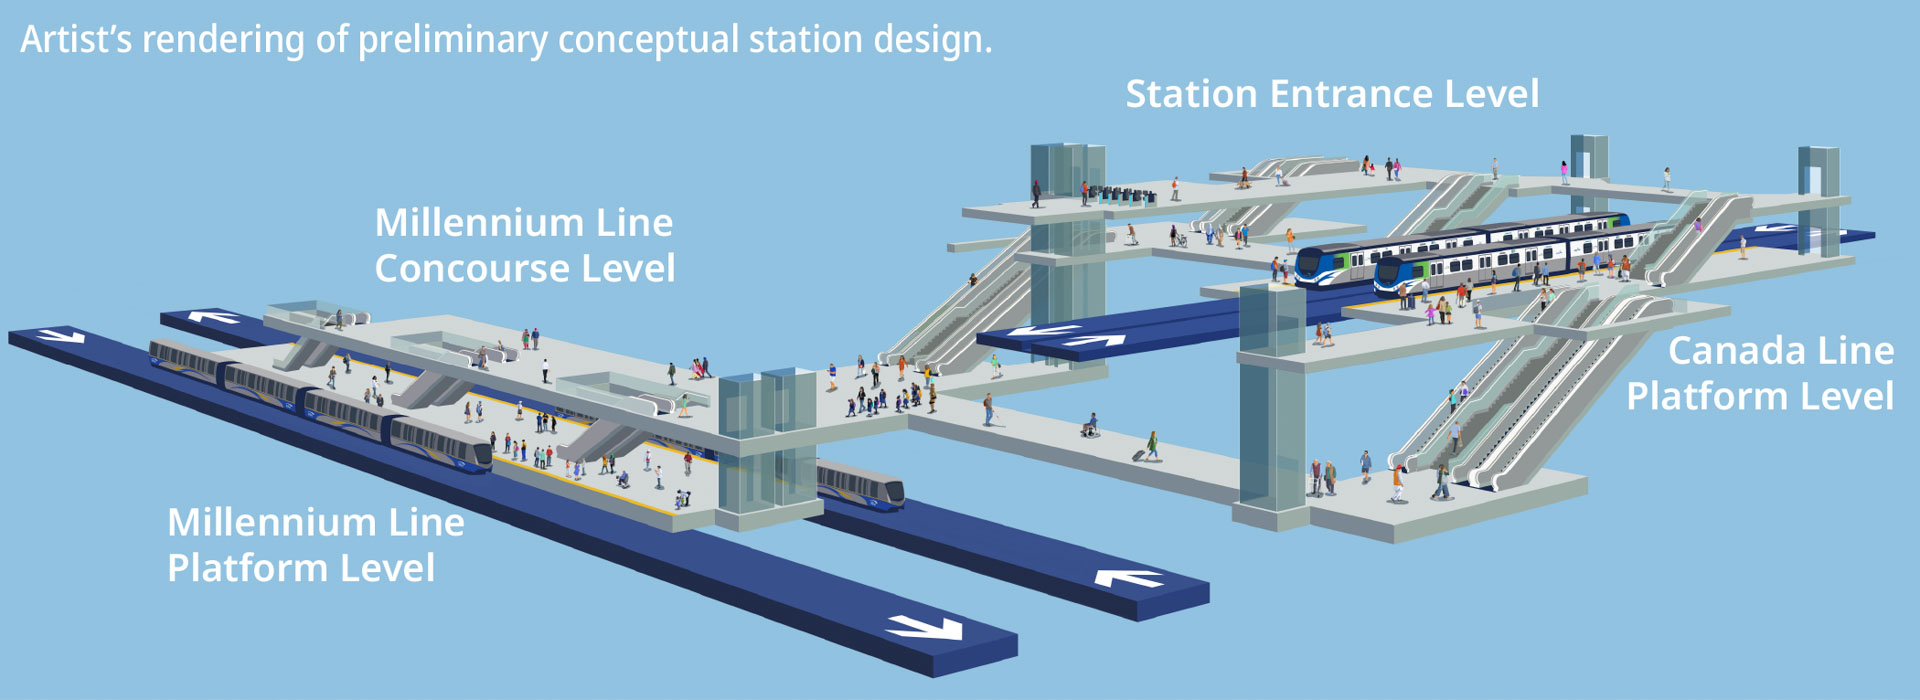 A rendering of what the completed connections between the Millennium Line and Canada Line platforms could look like. 